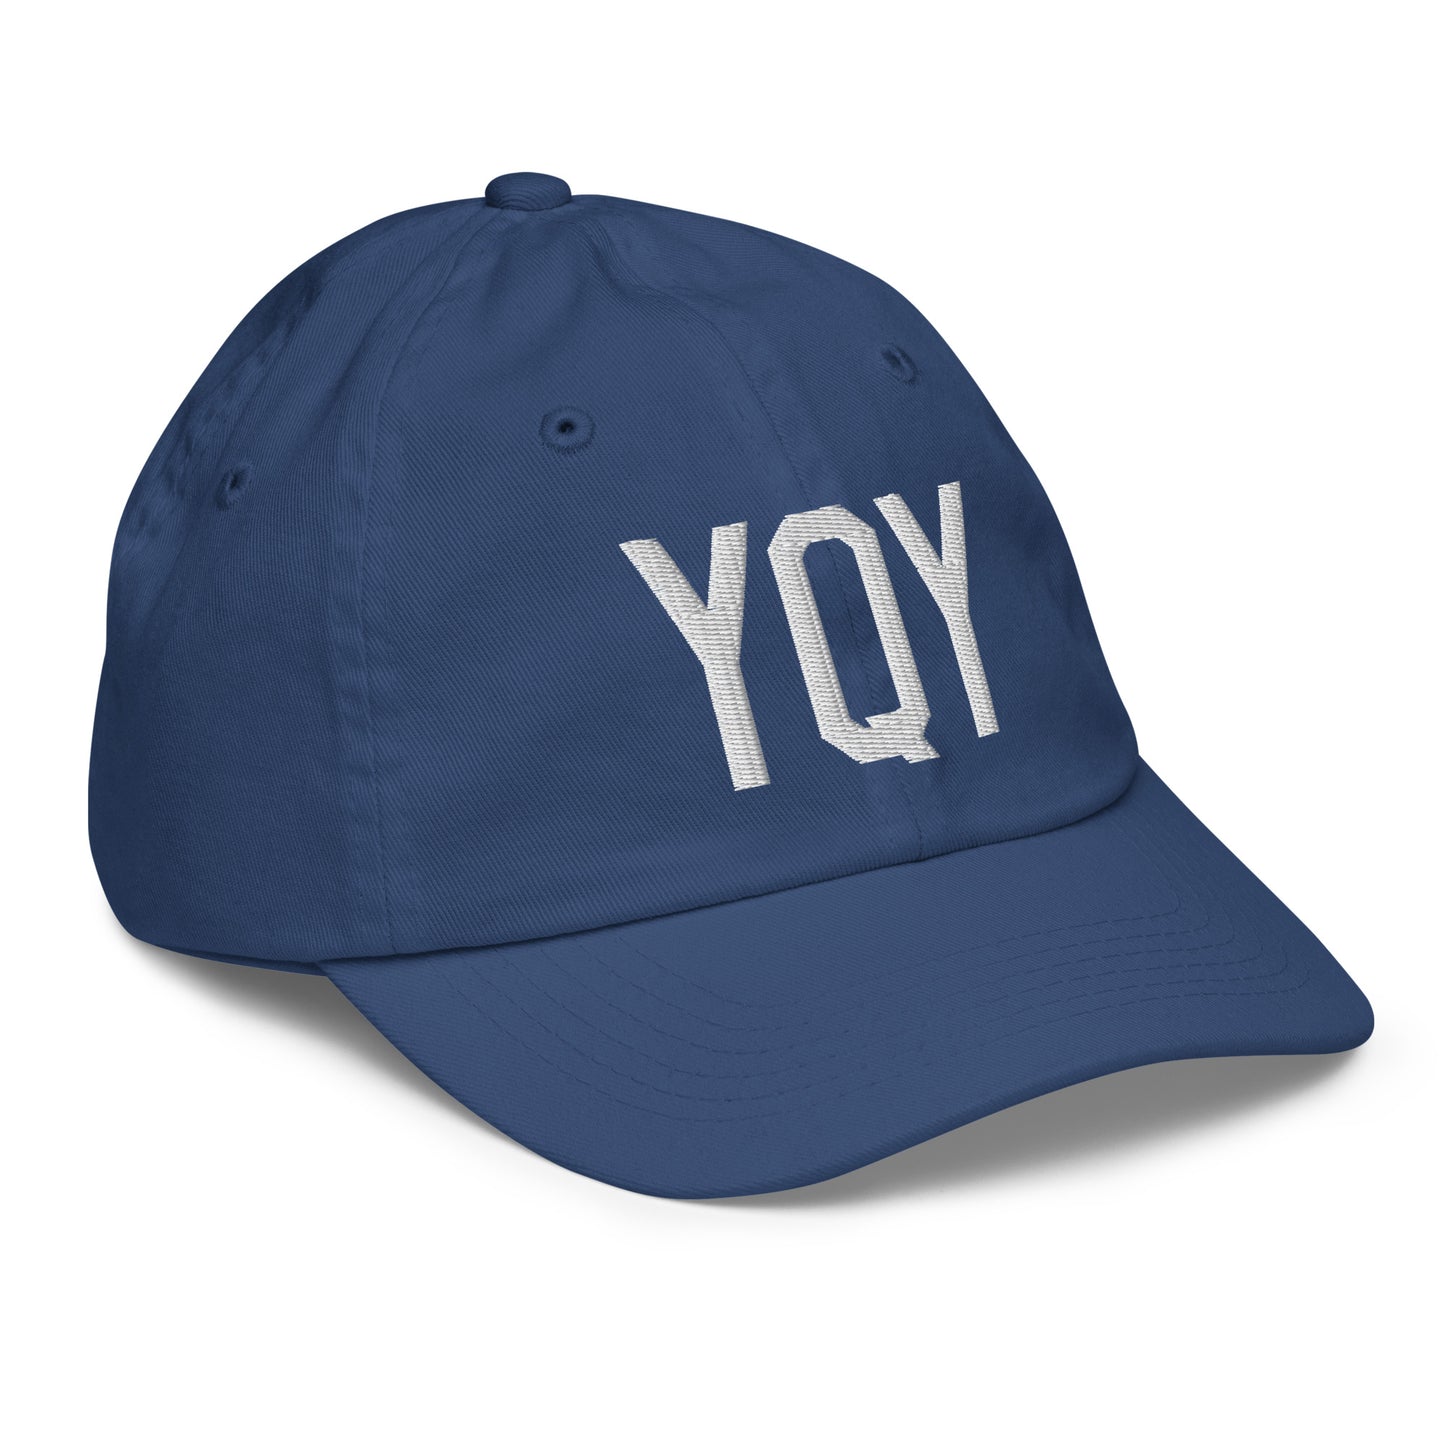 Airport Code Kid's Baseball Cap - White • YQY Sydney • YHM Designs - Image 21